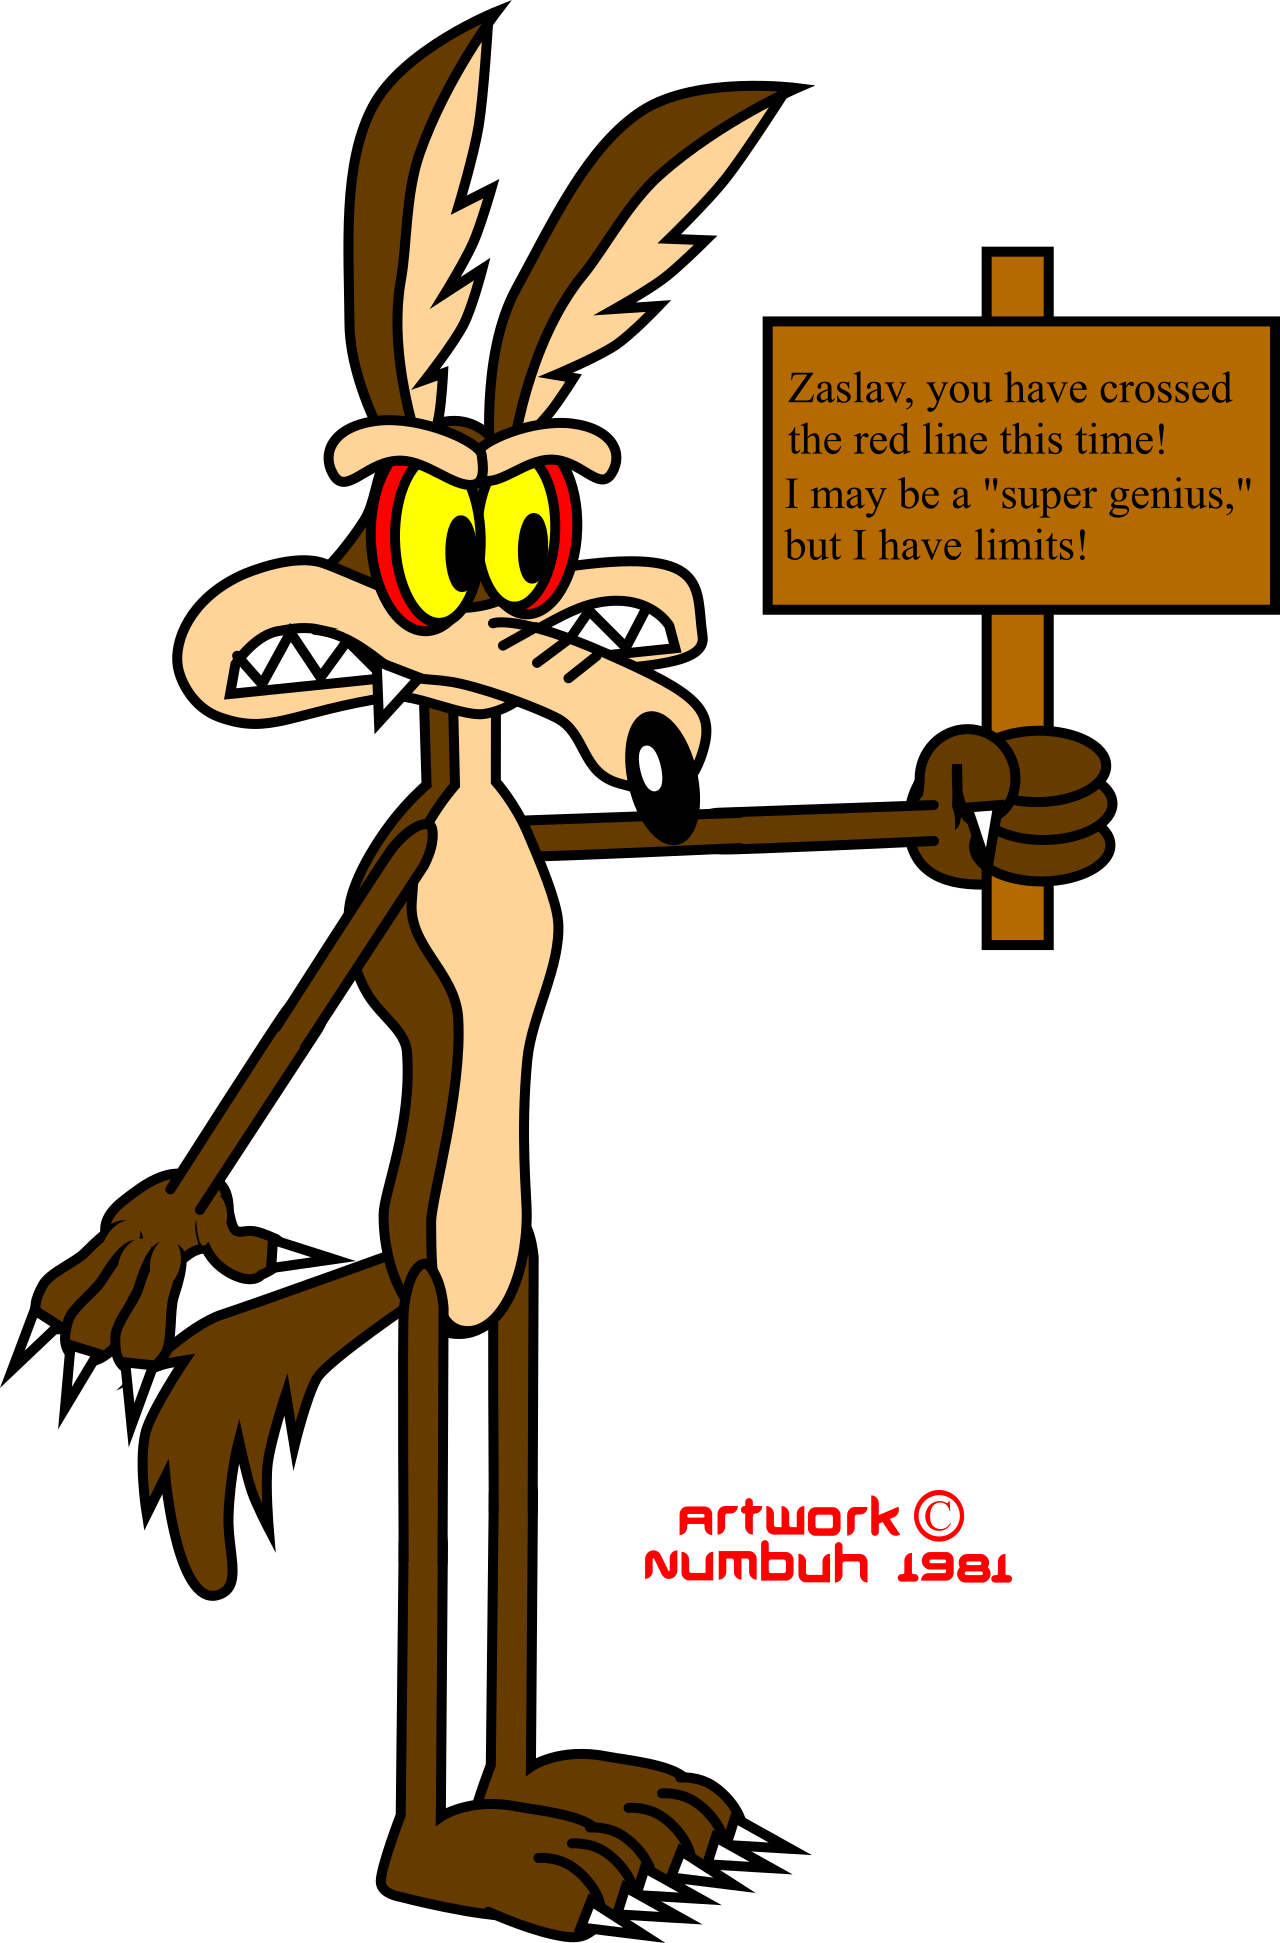 Even The Coyote Has Standards by Numbuh1981 on DeviantArt